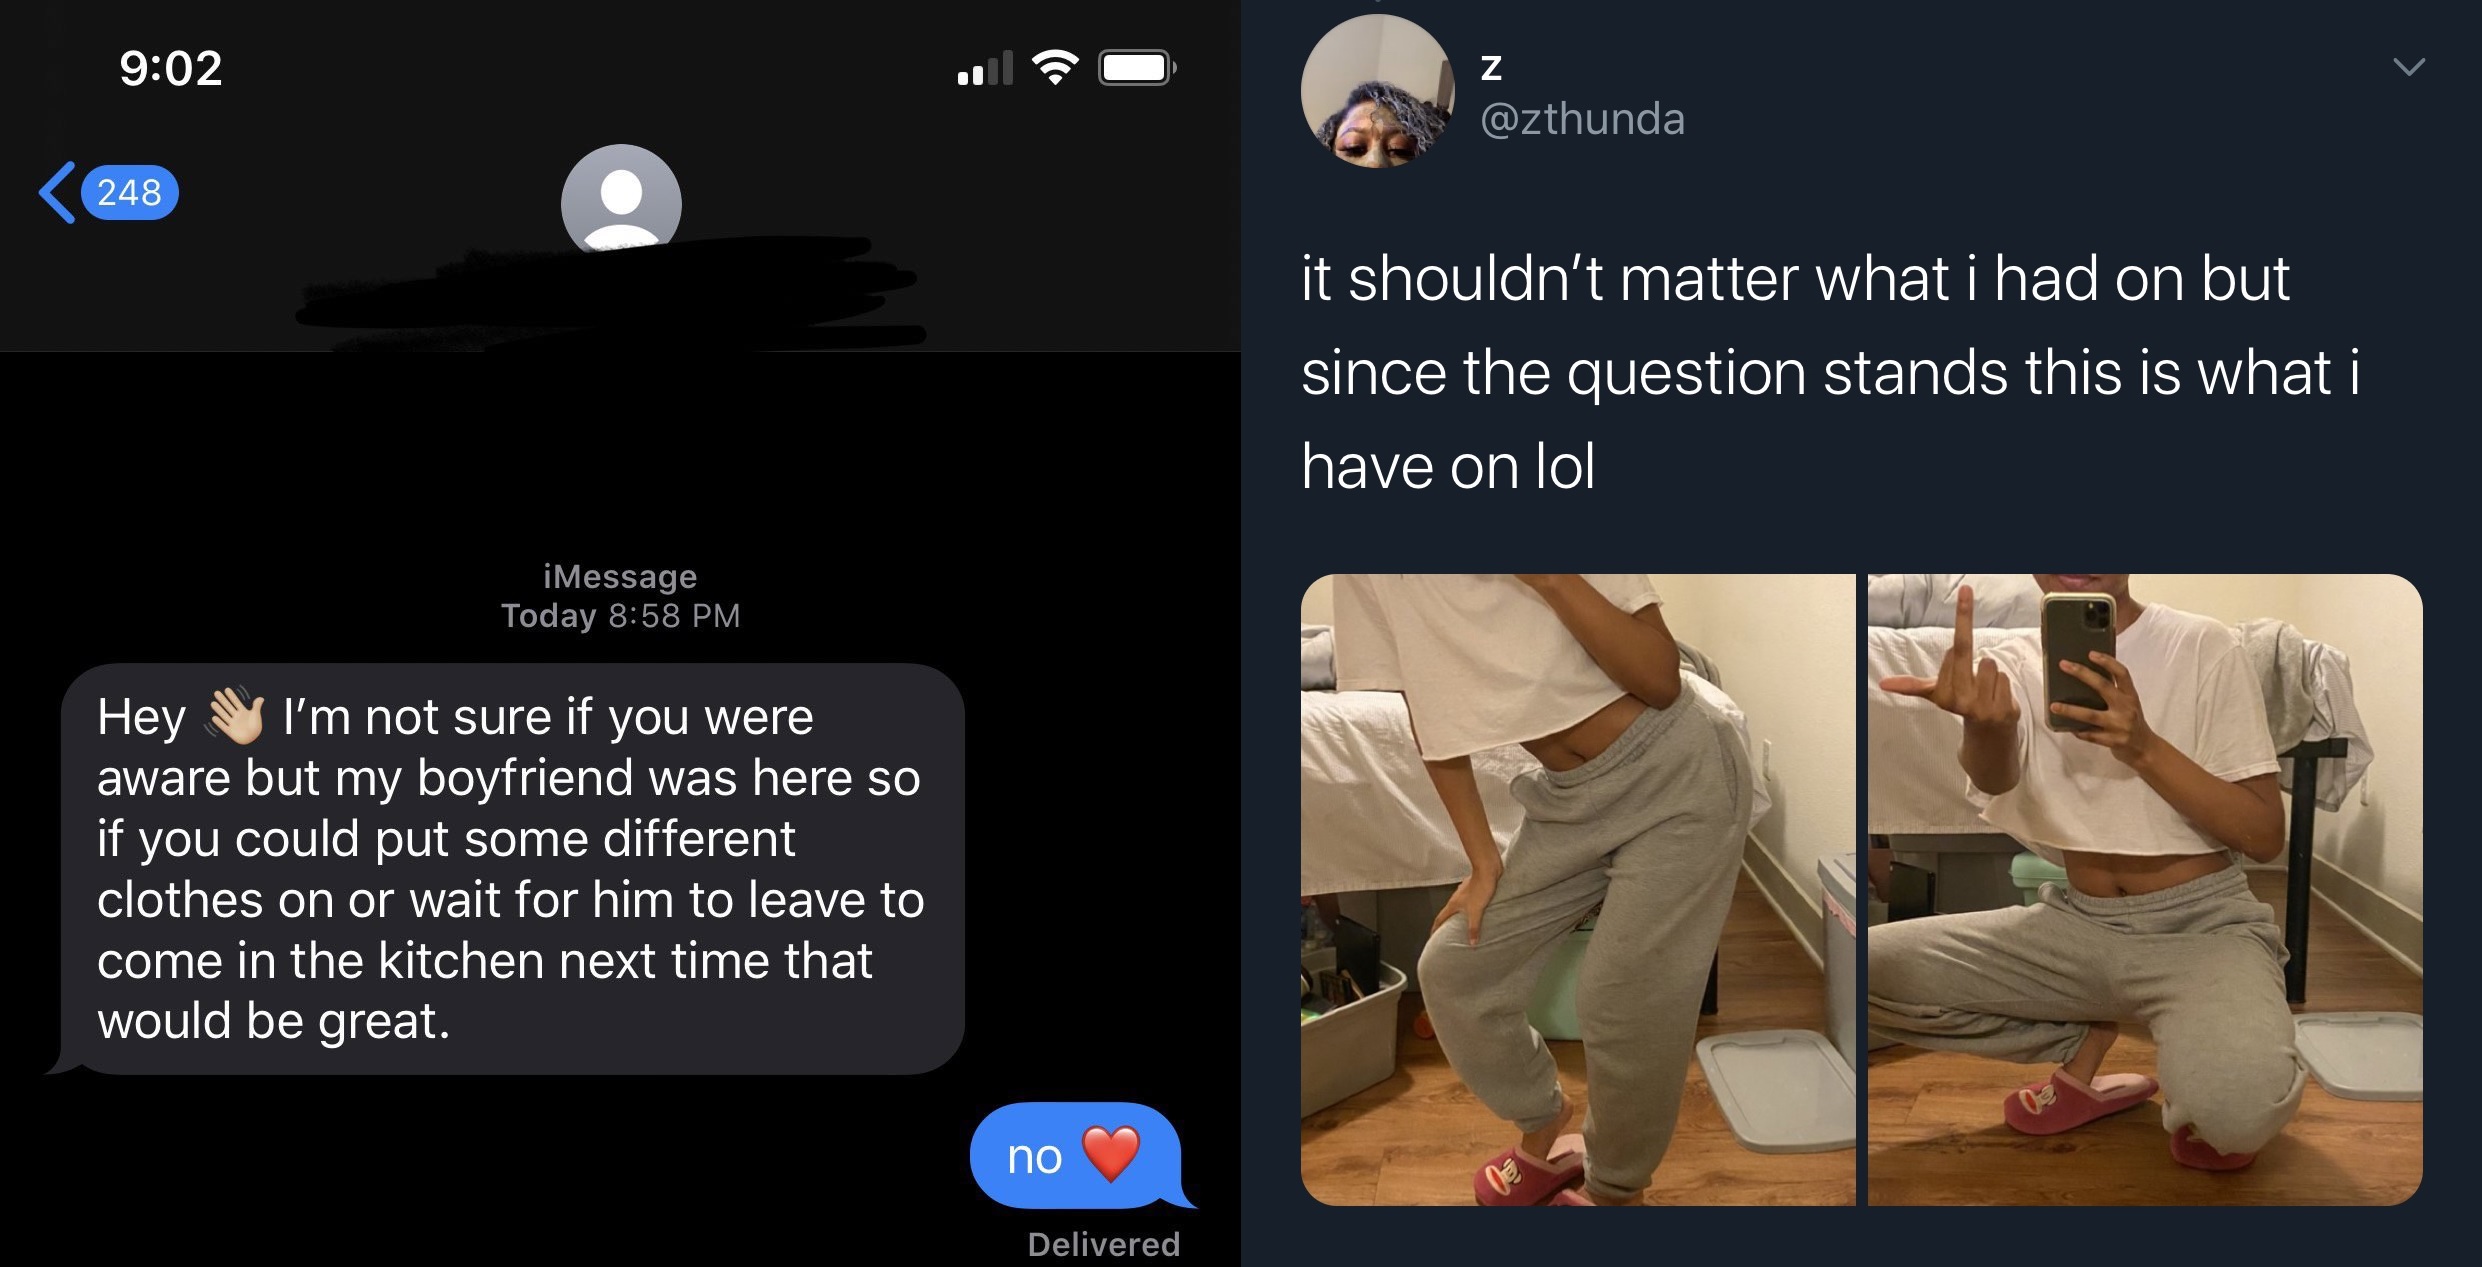 On Twitter, @zthunda went viral, when she shared what she was going through, with her roommate. Saying that her roommate lost her mind, @zthunda shared texts between her and her roommate, where she asked her to dress differently, when her boyfriend came over, or to just not come out until he leaves, to which @zthunda replied with "no." Then, @zthunda shows what she was wearing, and it was a t-shirt and sweats.